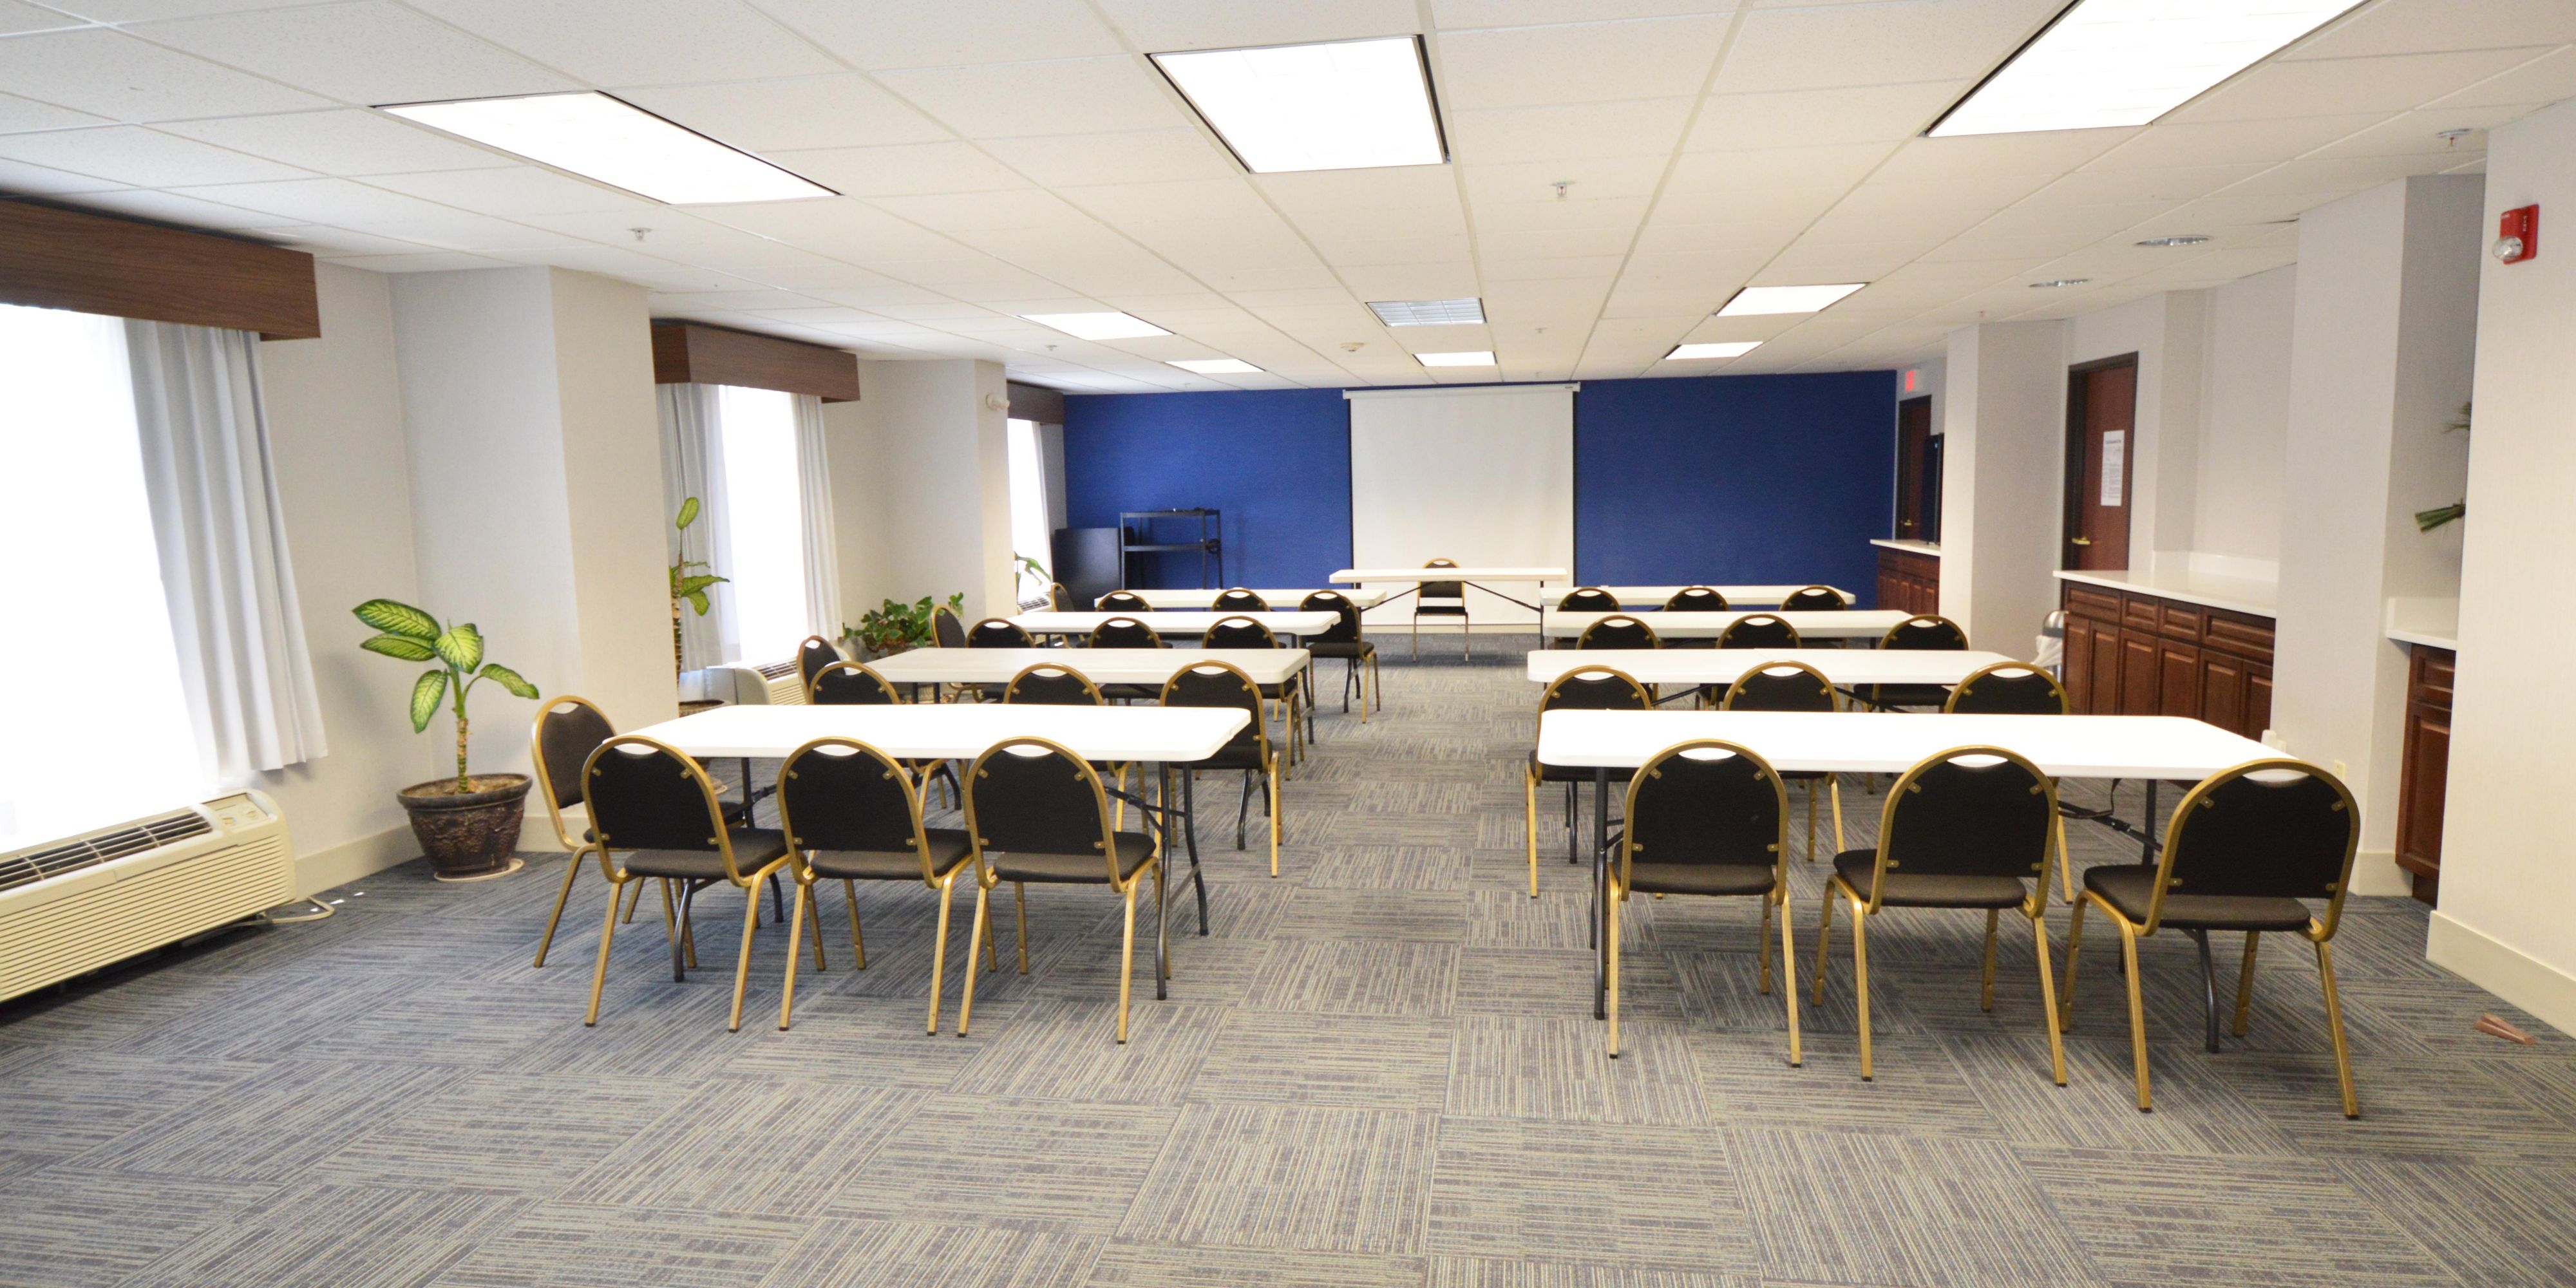 Have your next company meeting or party with us! Our large 1500 sq ft space is perfect for any occasion. Feel free to buckle down or party up in our renovated meeting room. Come on in, stretch your legs and enjoy the event!